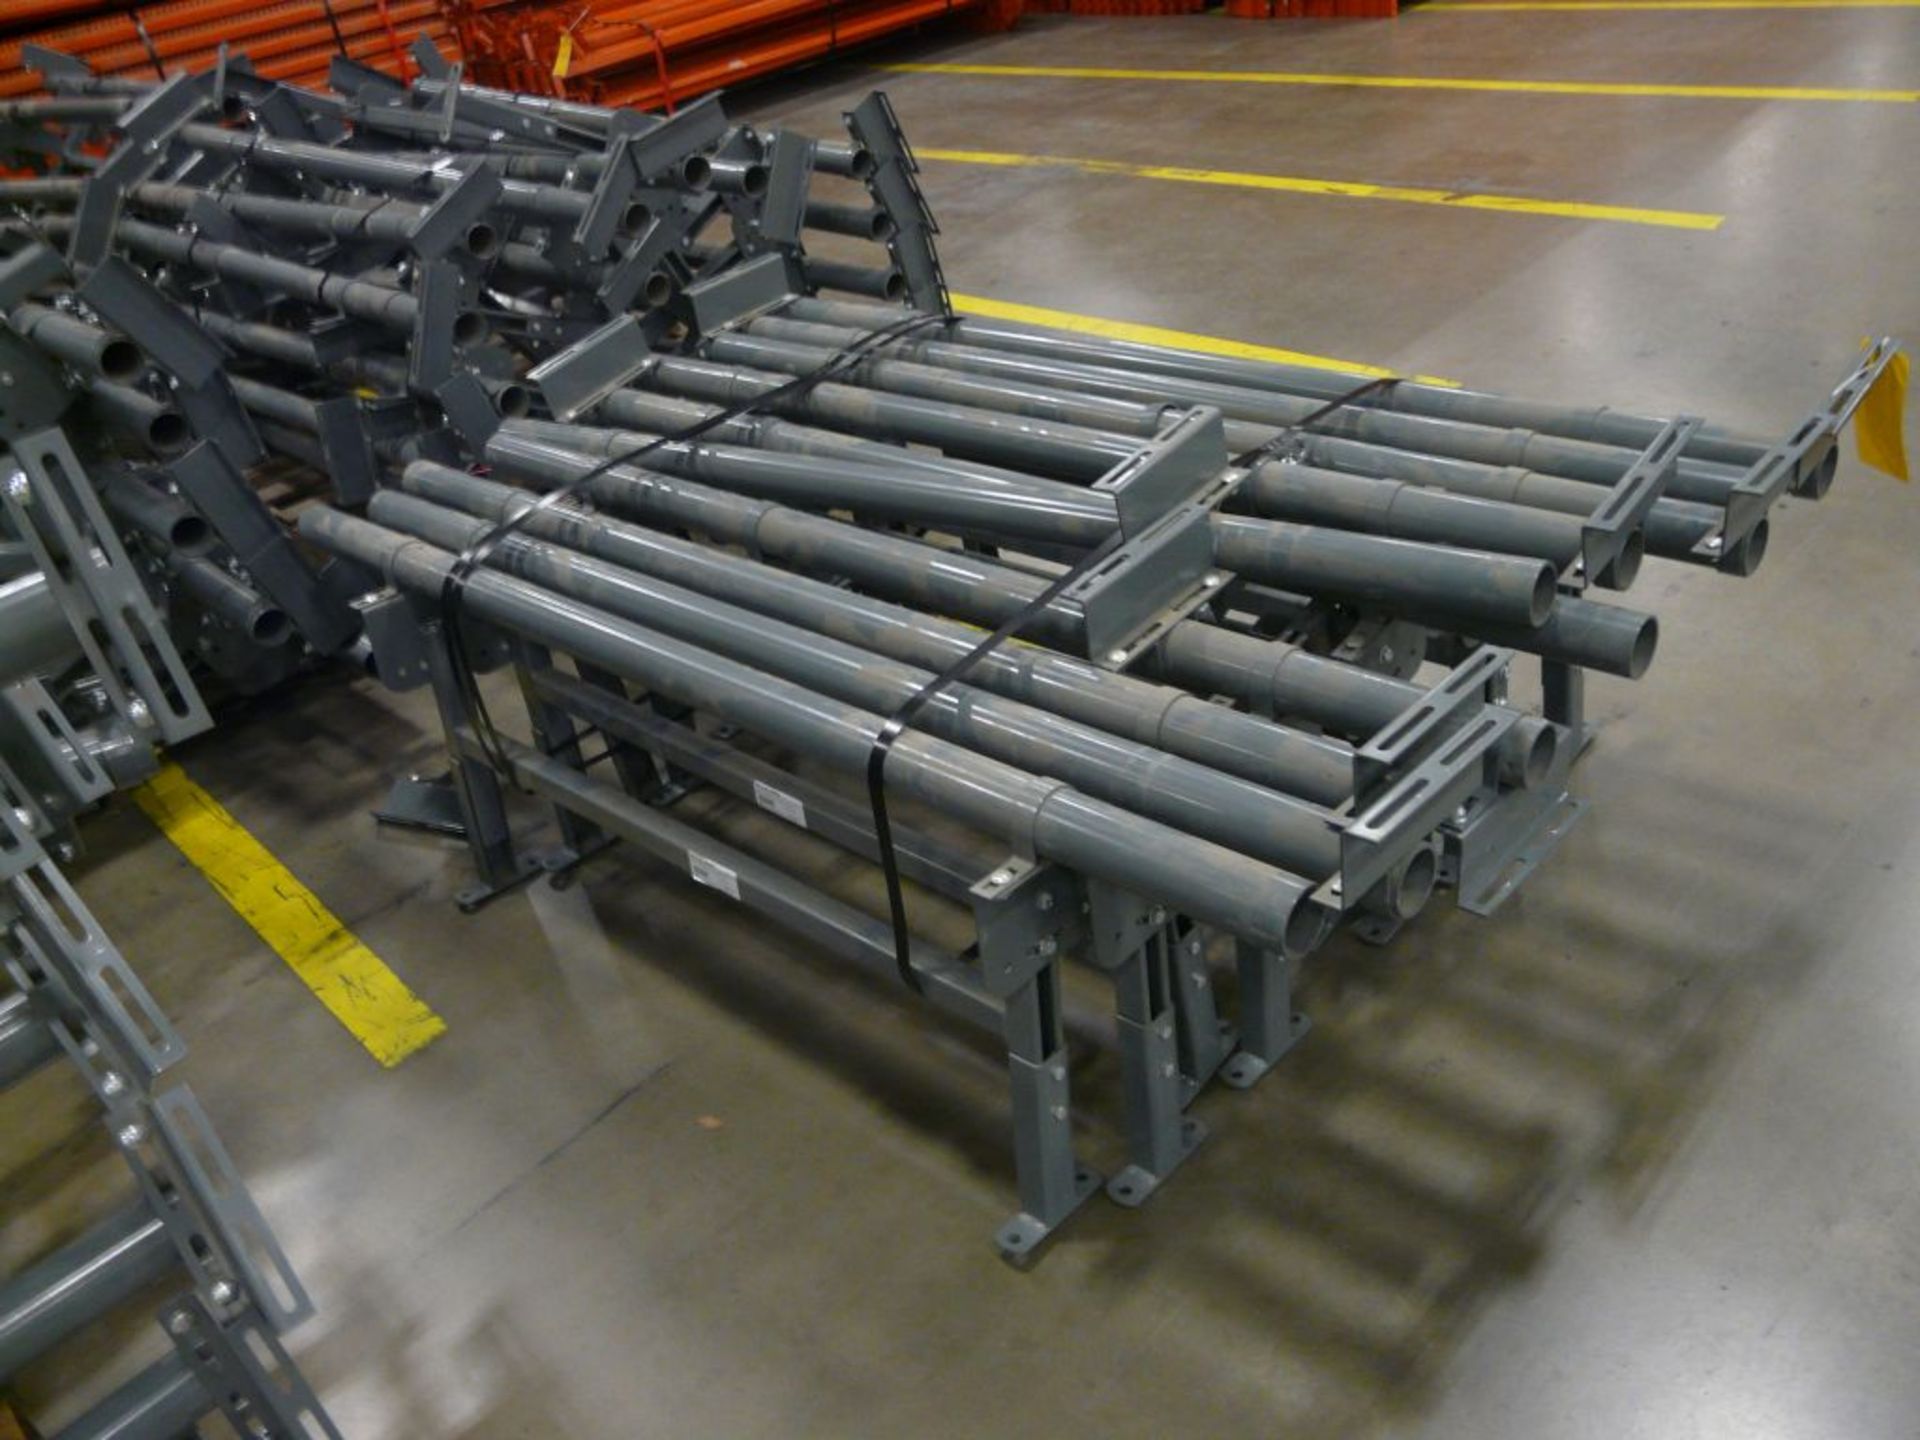 Lot of (10) USA Floor Supports - Brace: 71"L; Stand: 44"L x 19"H; Tag: 223862 - $30 Lot Loading Fee